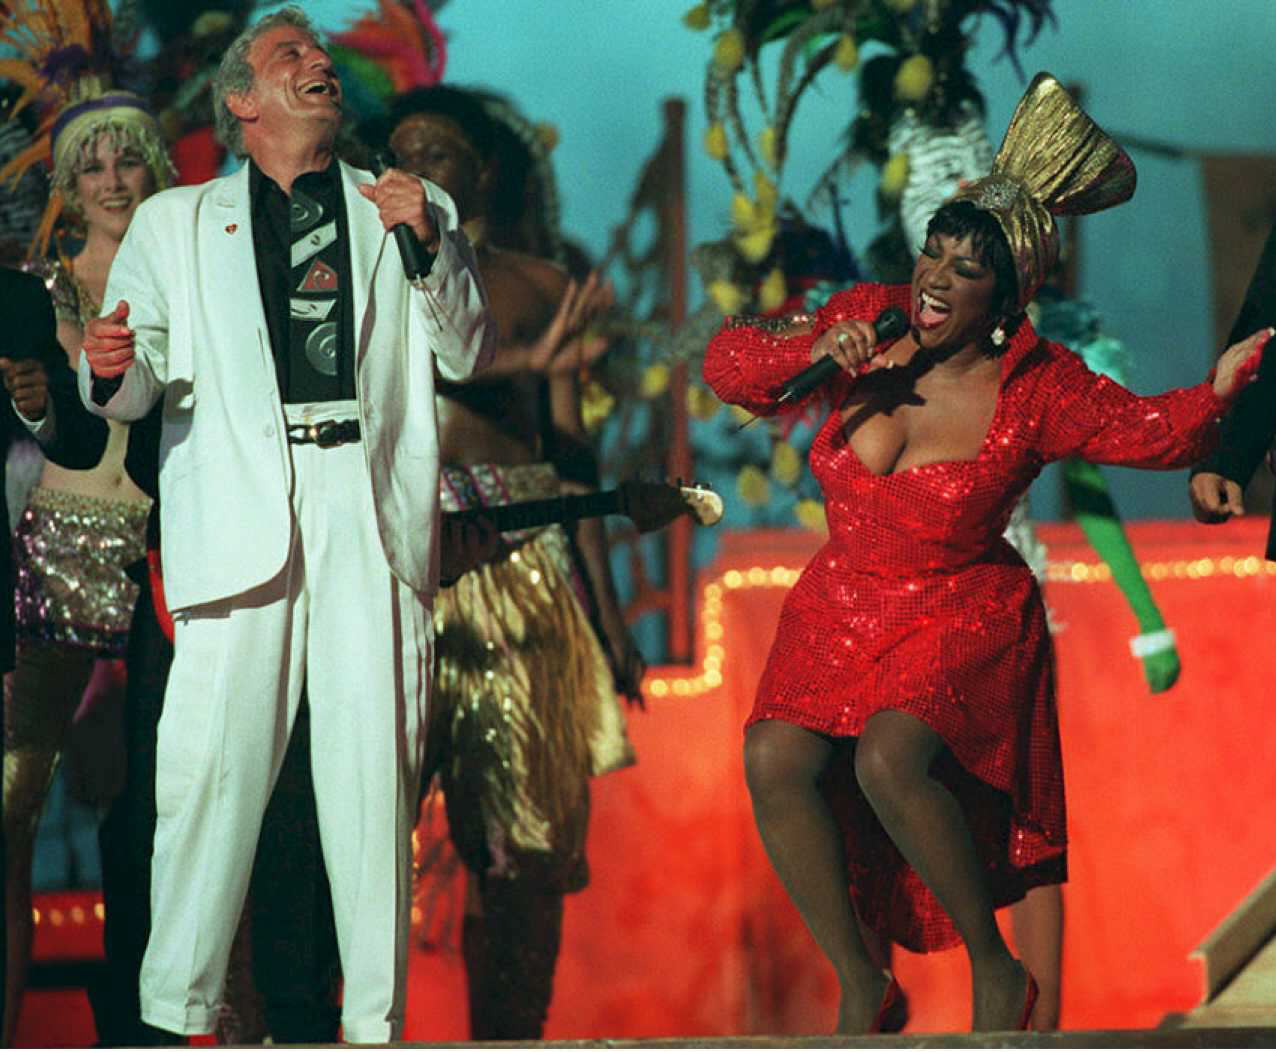 Tony Bennett and Patti LaBelle perform during Super Bowl XXIX in Miami on Jan. 29, 1995.